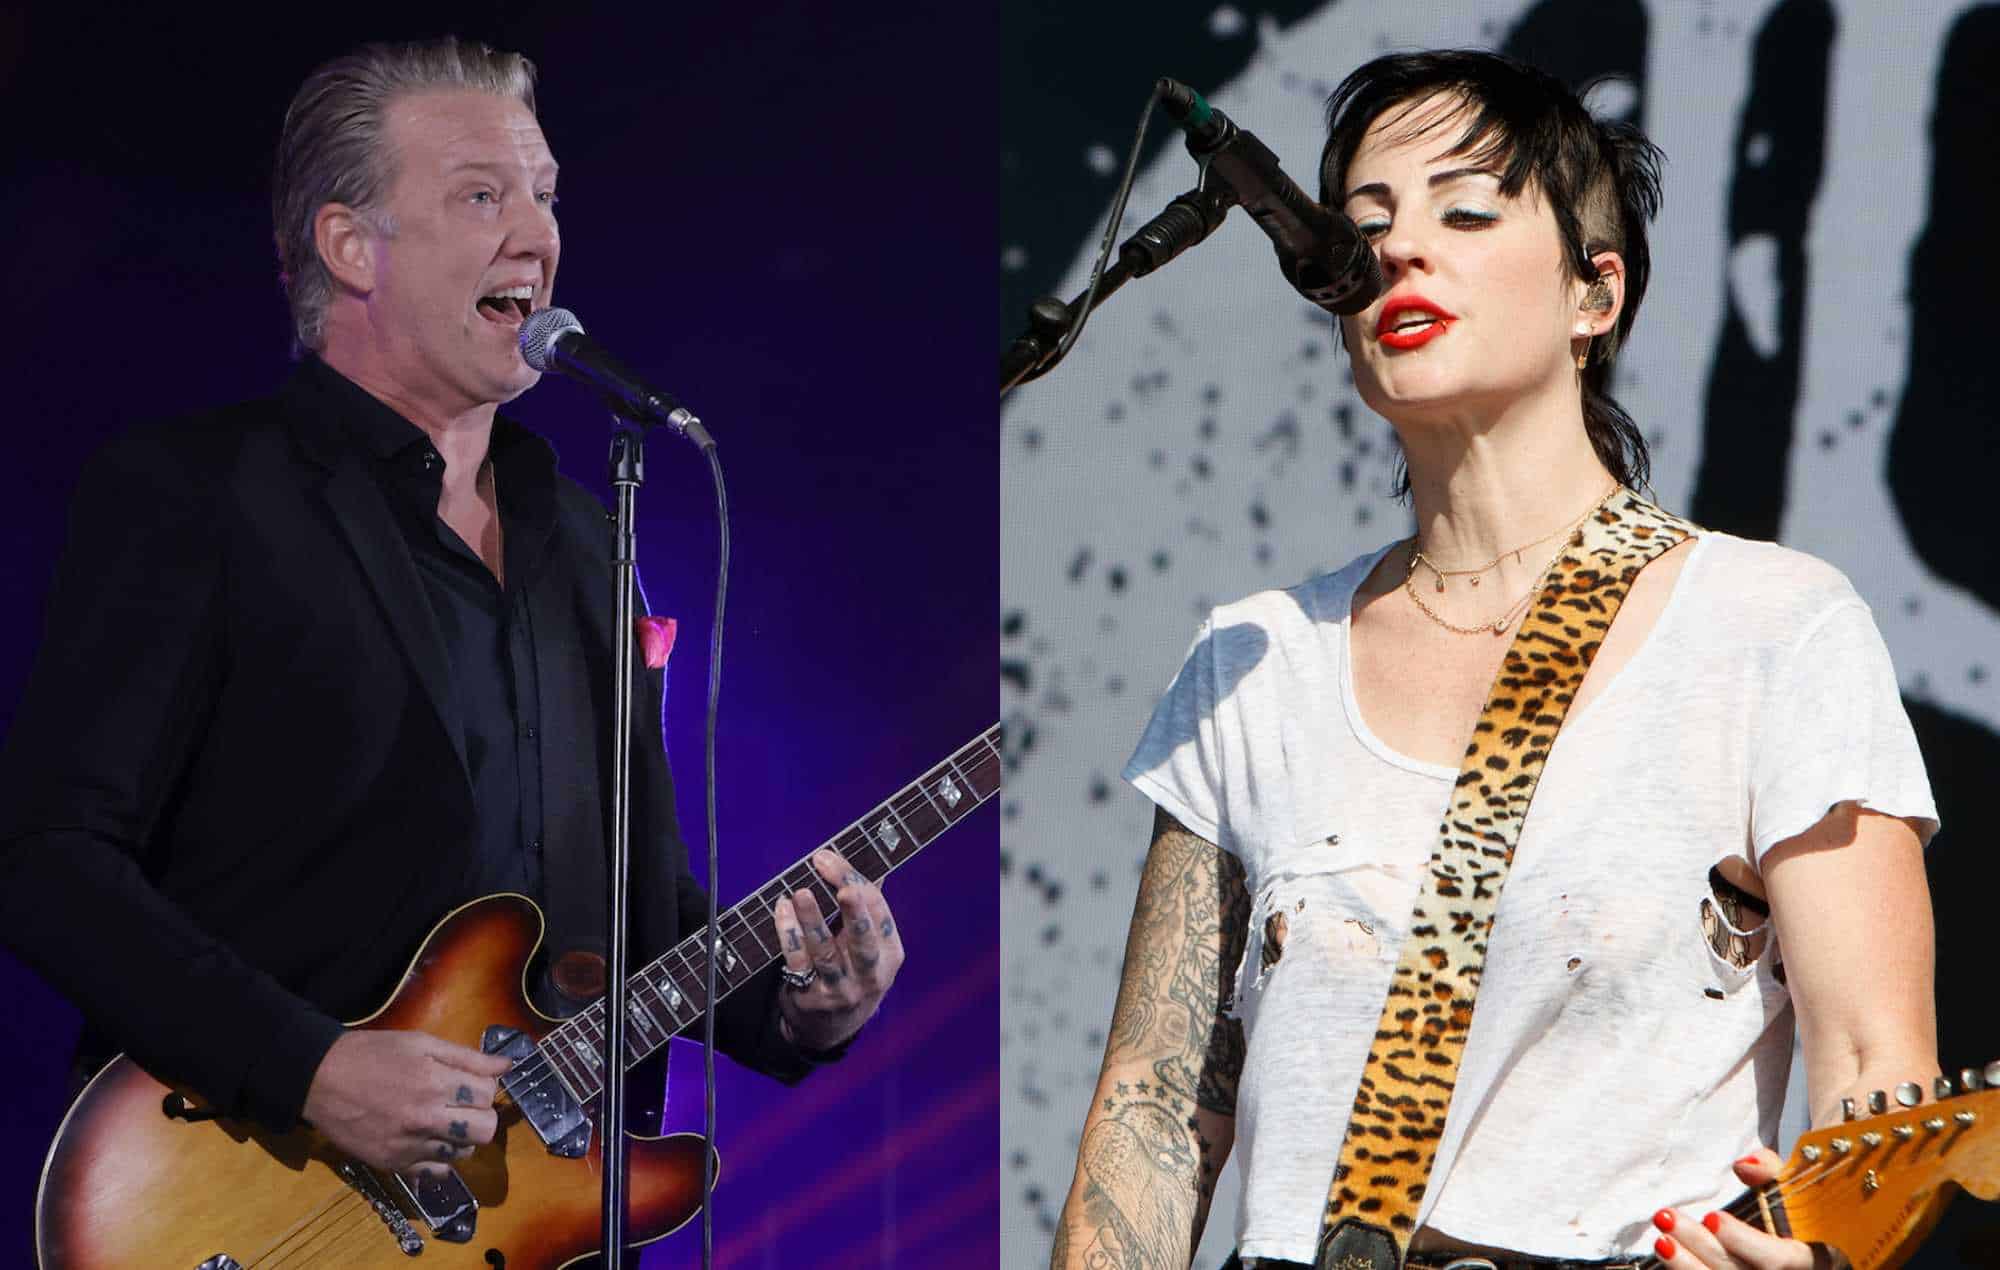 Josh Homme alongside singer and ex-wife Brody Dalle.